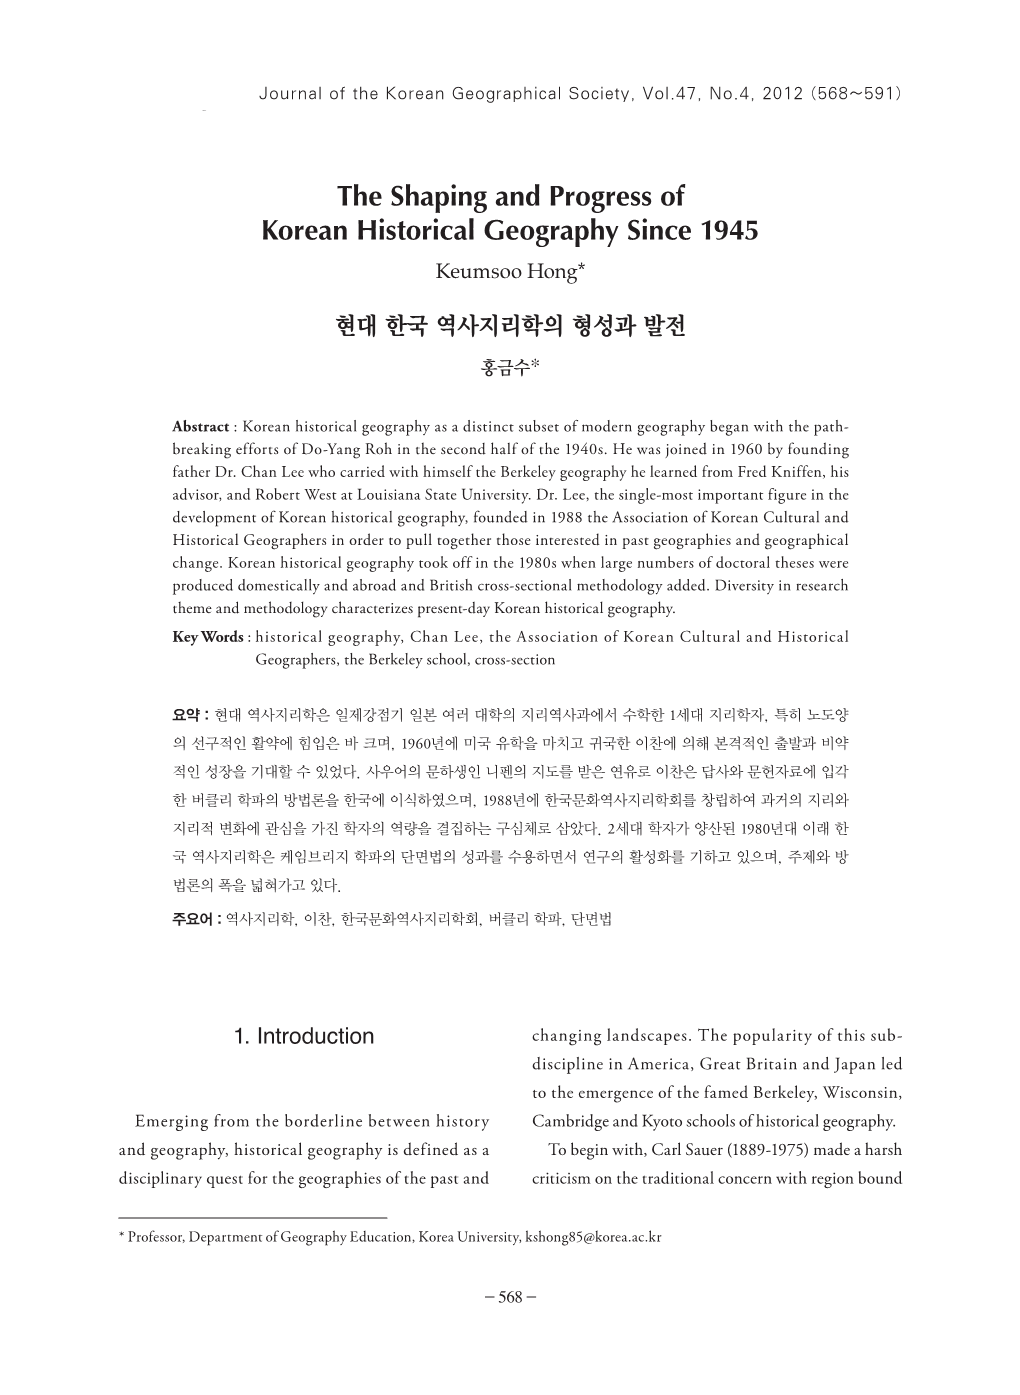 The Shaping and Progress of Korean Historical Geography Since 1945 Keumsoo Hong*